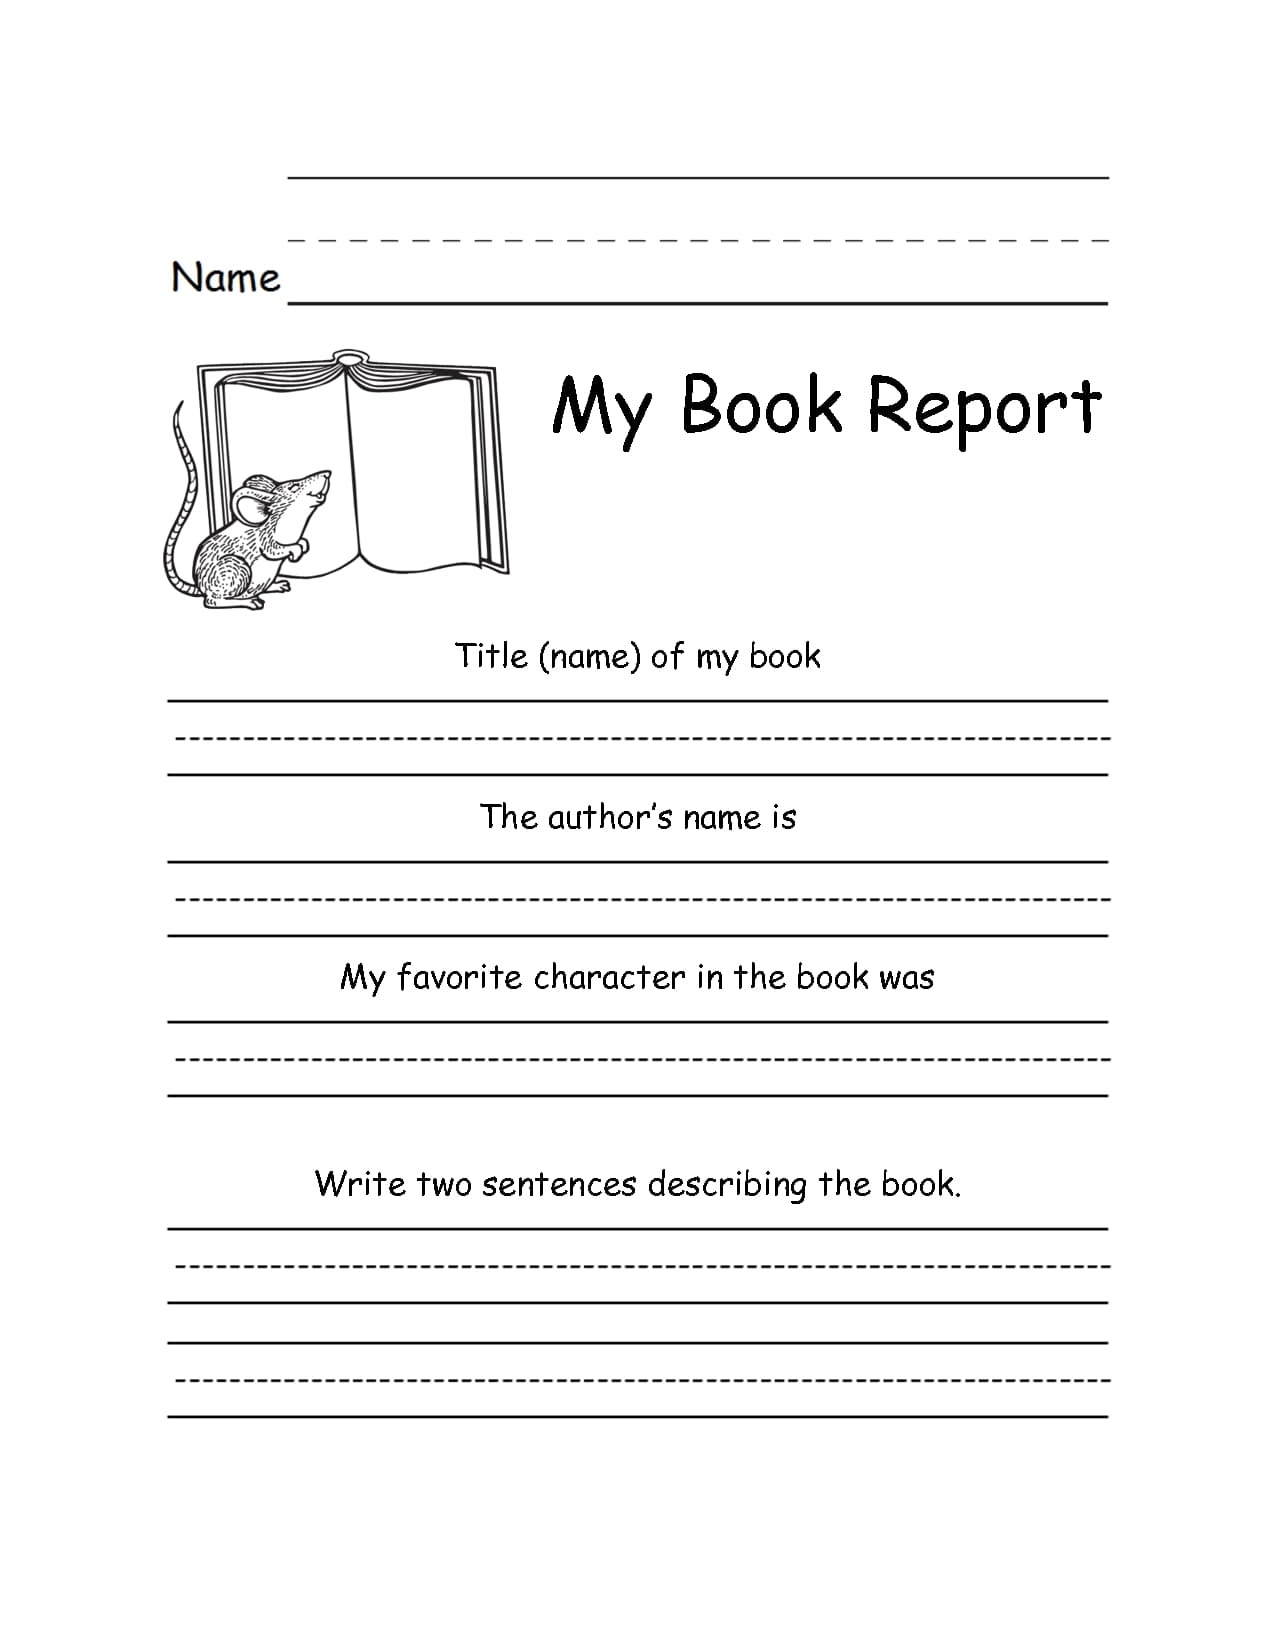 Free Printable Book Report Forms_93211